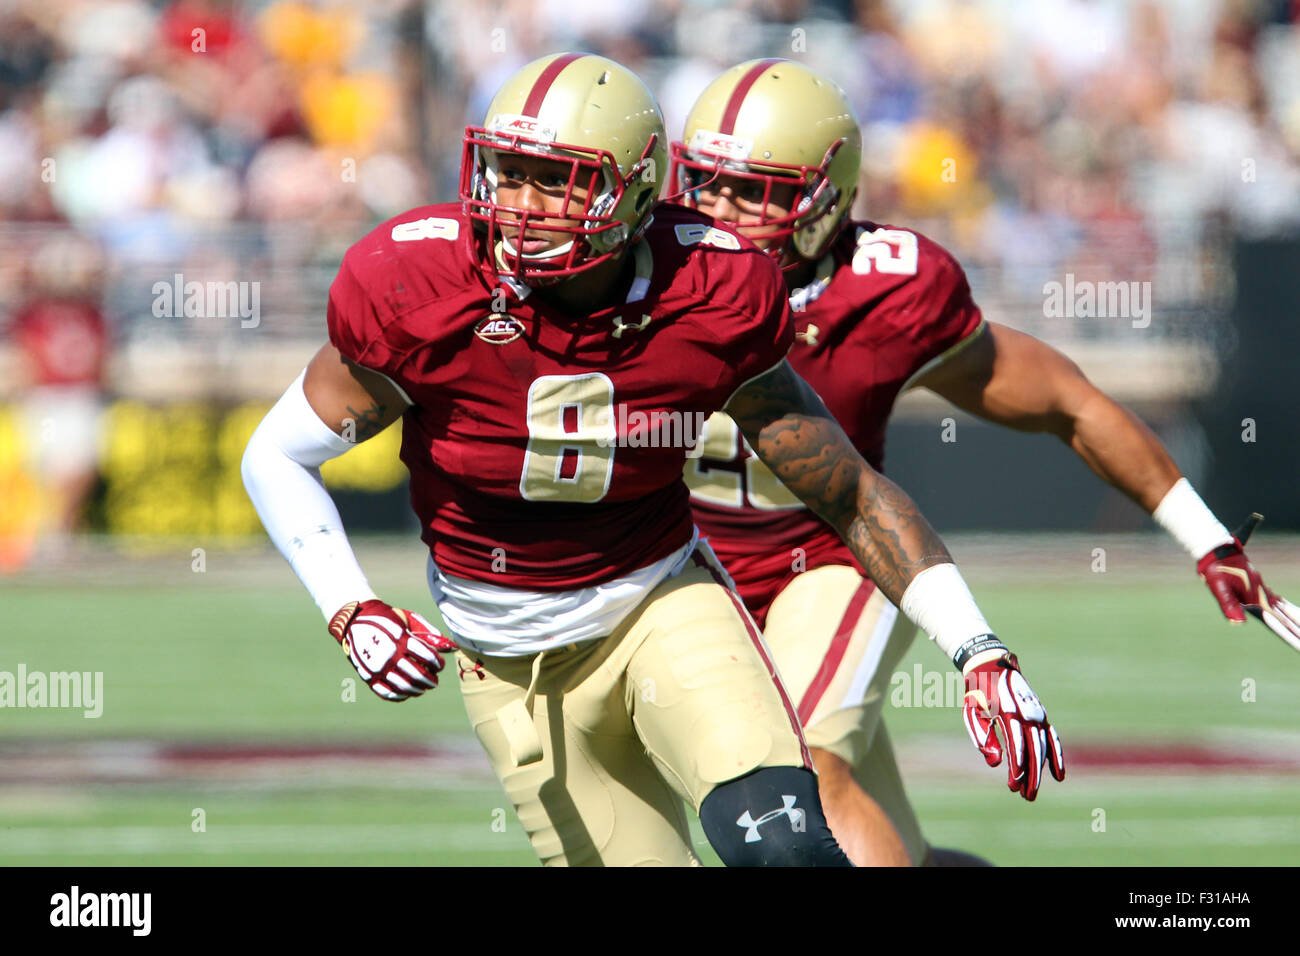 September 26, 2015; Chestnut Hill, MA, USA; Boston College Eagles defensive lineman Harold Landry (8) and Boston College Eagles linebacker Matt Milano (28) in action during the NCAA football game between the Boston College Eagles and Northern Illinois Huskies at Alumni Stadium. Boston College defeated Northern Illinois 17-14. Anthony Nesmith/Cal Sport Media Stock Photo